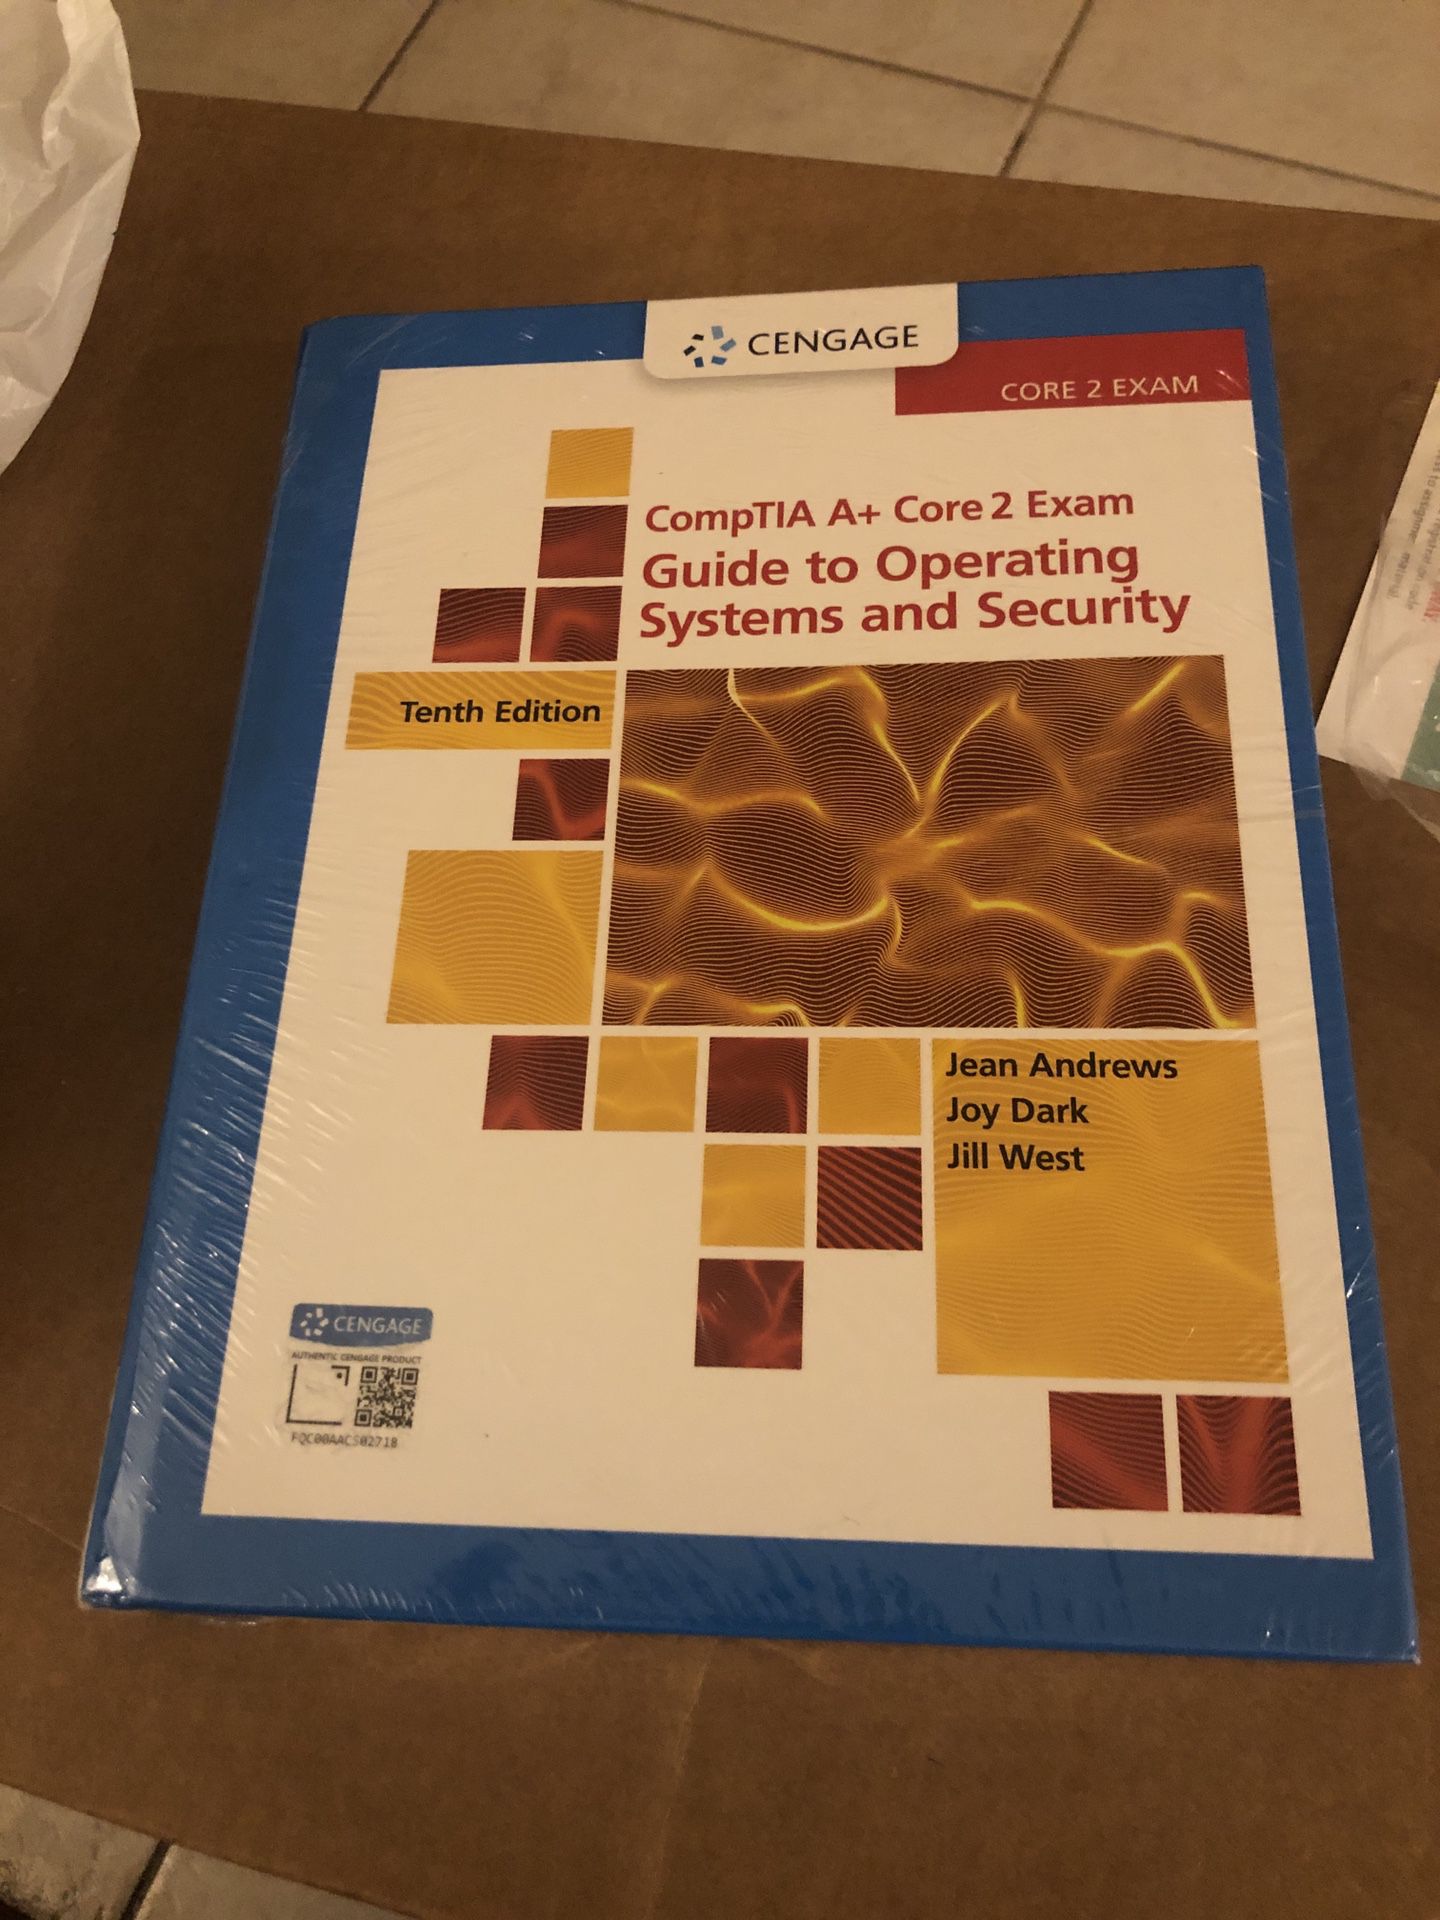 CompTIA A+ Core 2 Exam: Guide to Operating Systems and Security by Jill West.